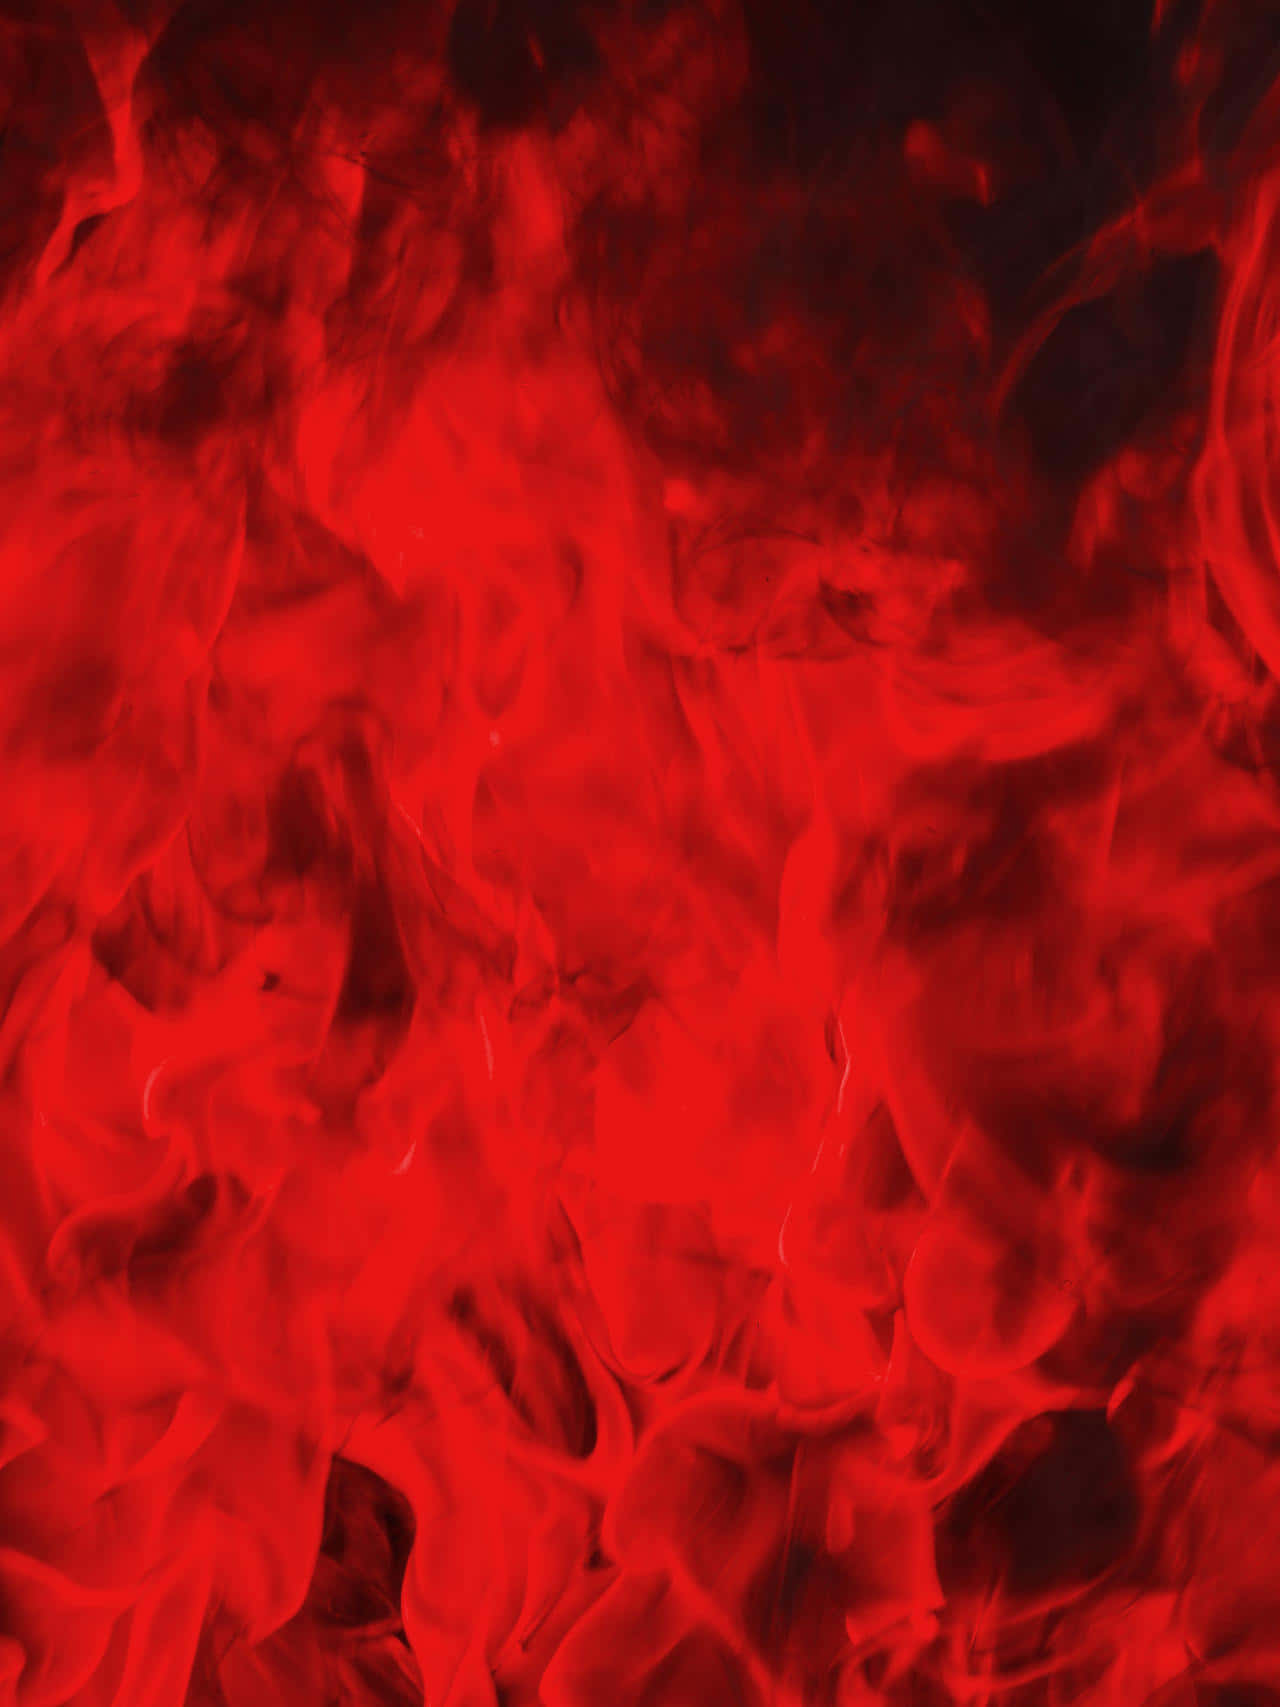 Get fired up with this invigorating Red Fire background.